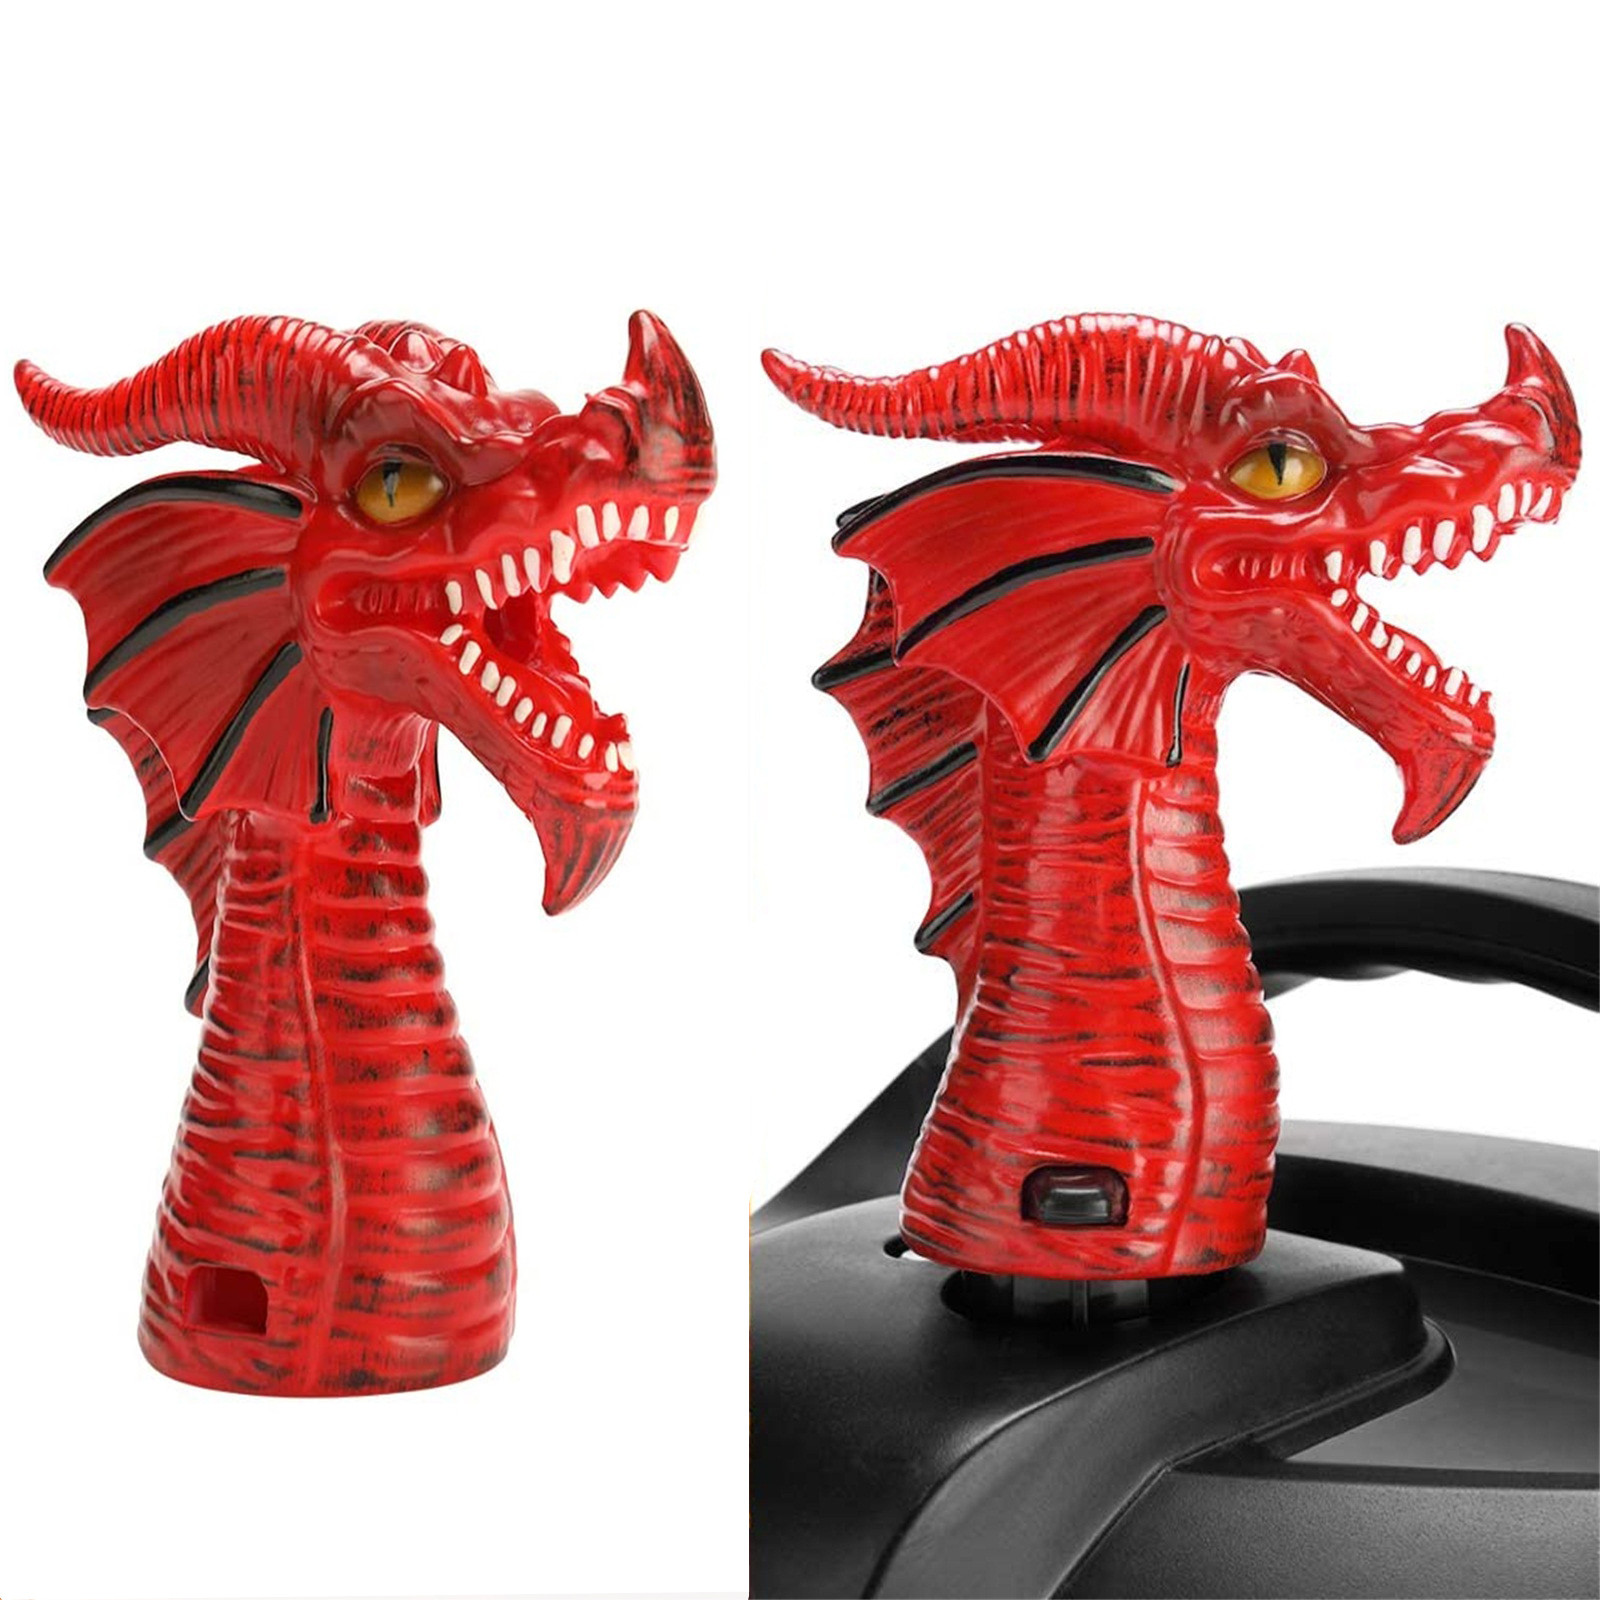 Fire Breathing Dragon Steam Release Accessory Steam Diverter For Pressure Cooker Kitchen Supplies Cookware Parts Tools #T3G